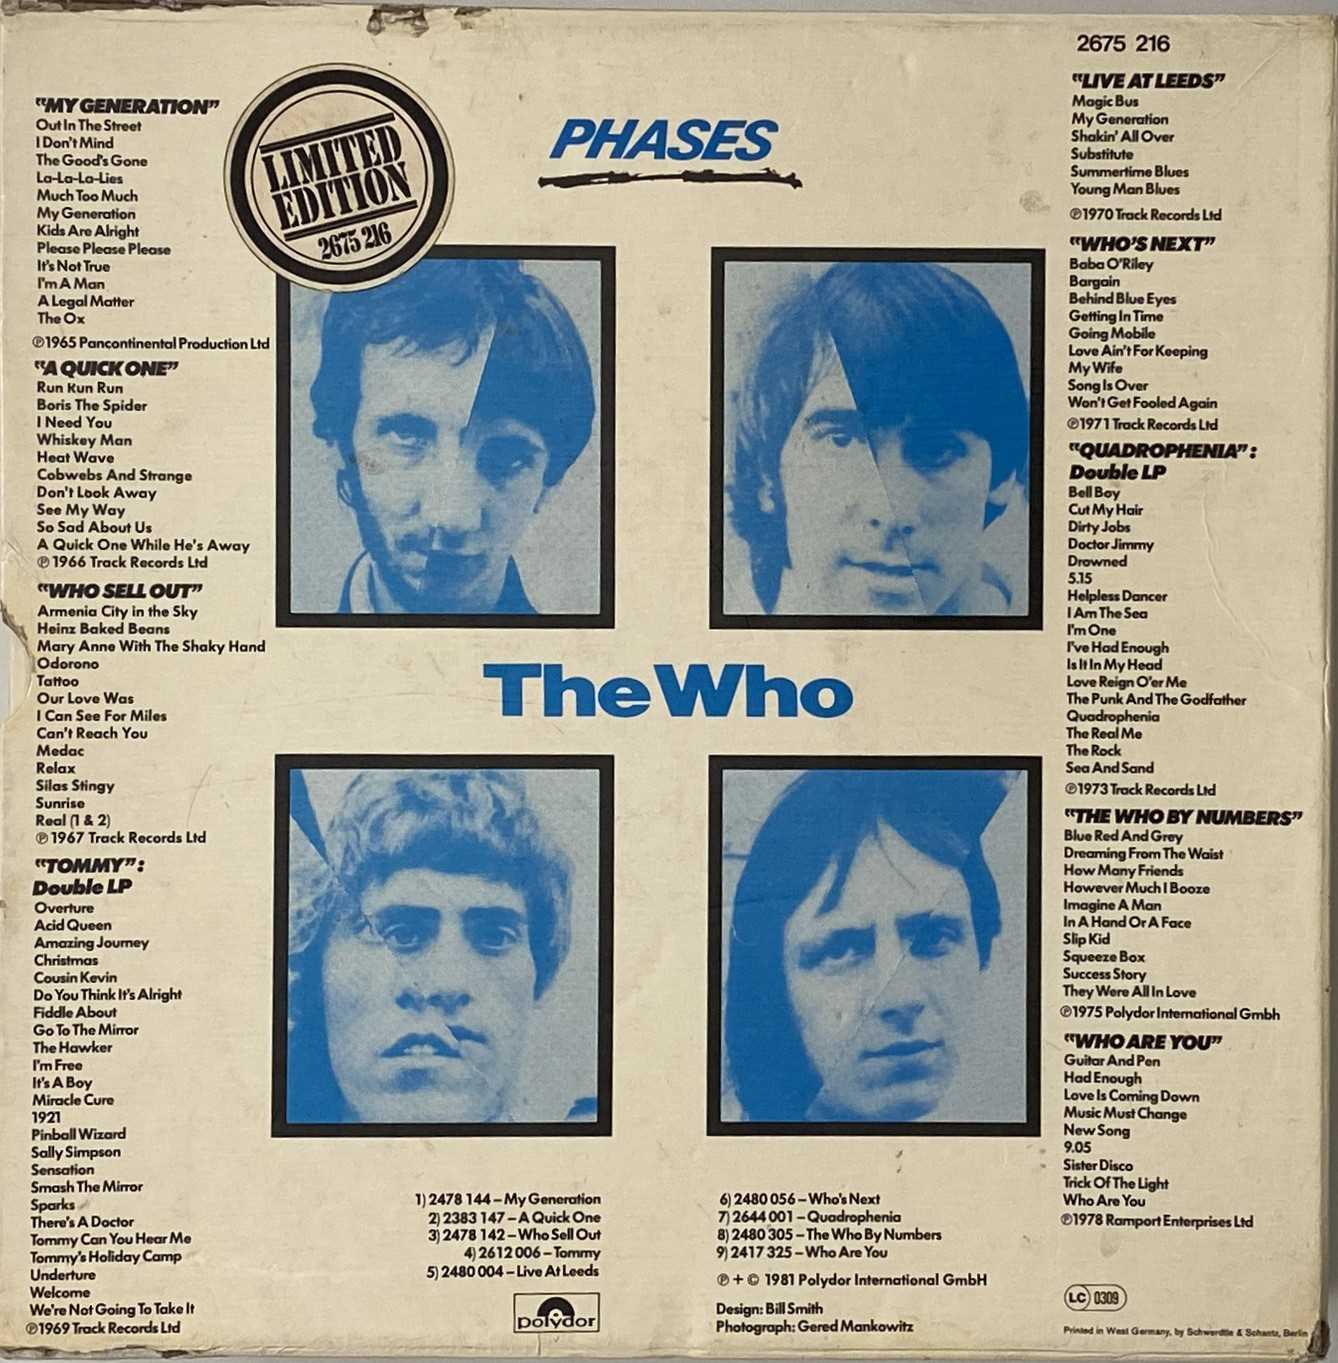 THE WHO - PHASES (11 x LP BOX SET - POLYDOR 2675 216) - Image 2 of 4